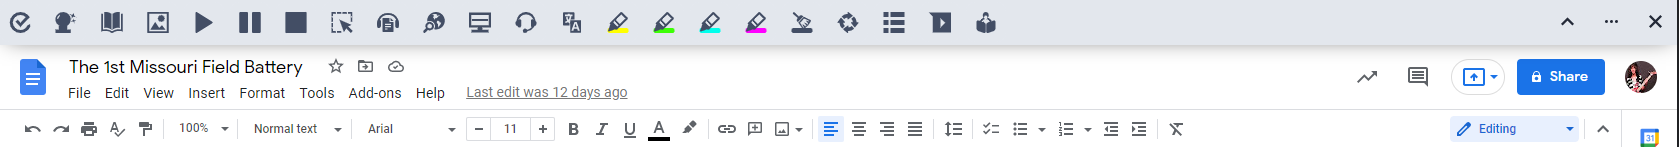 Read&Write for Google Chrome Toolbar Enabled